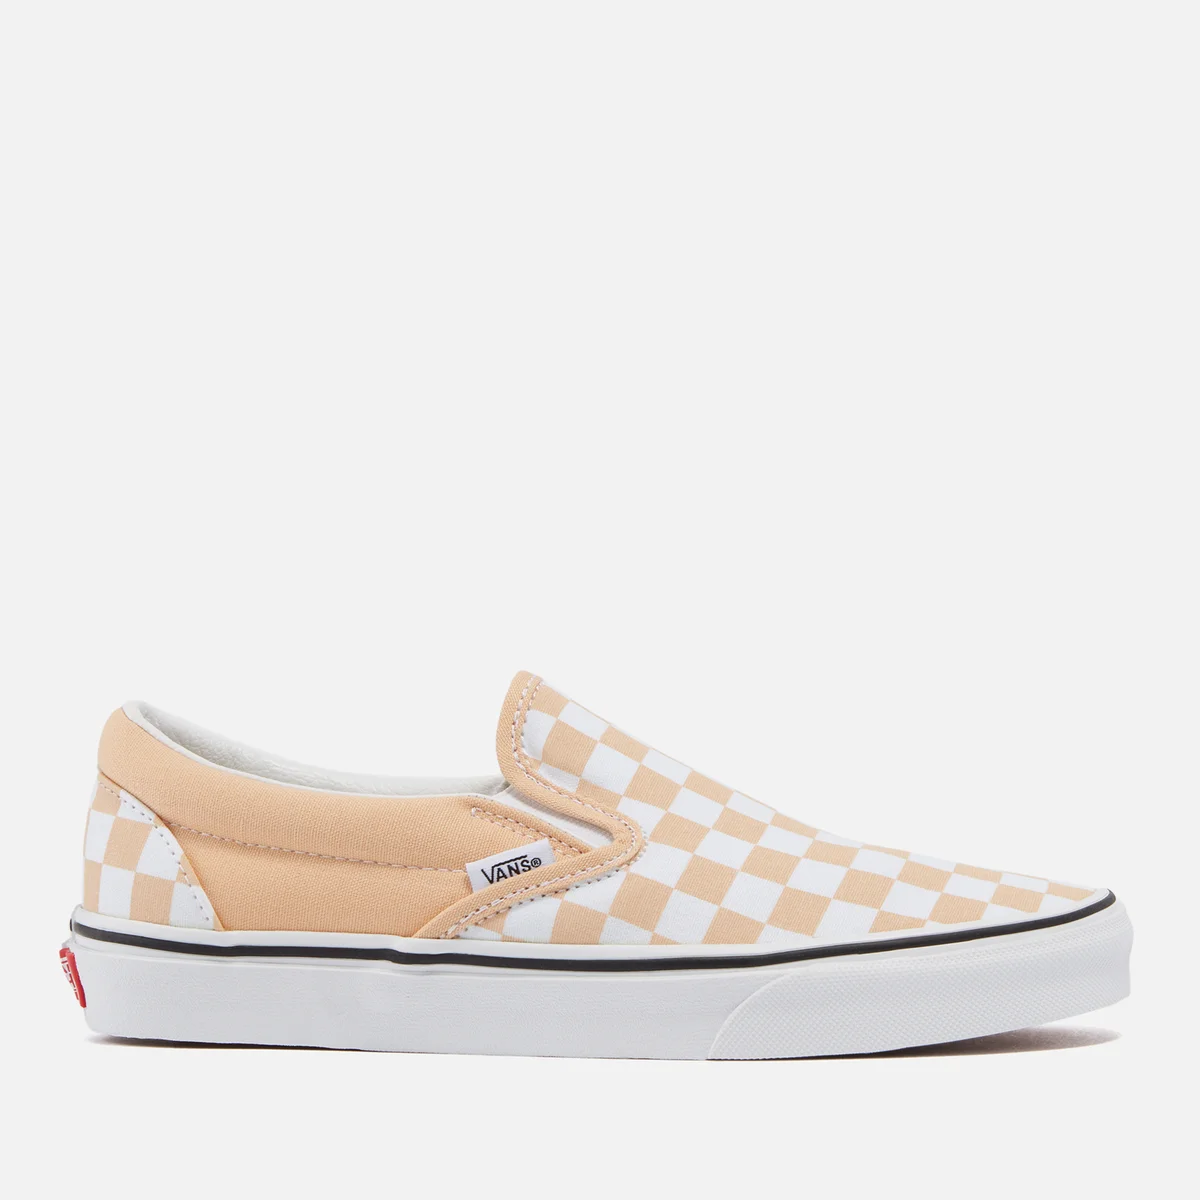 Vans Checkerboard Classic Canvas Trainers Image 1